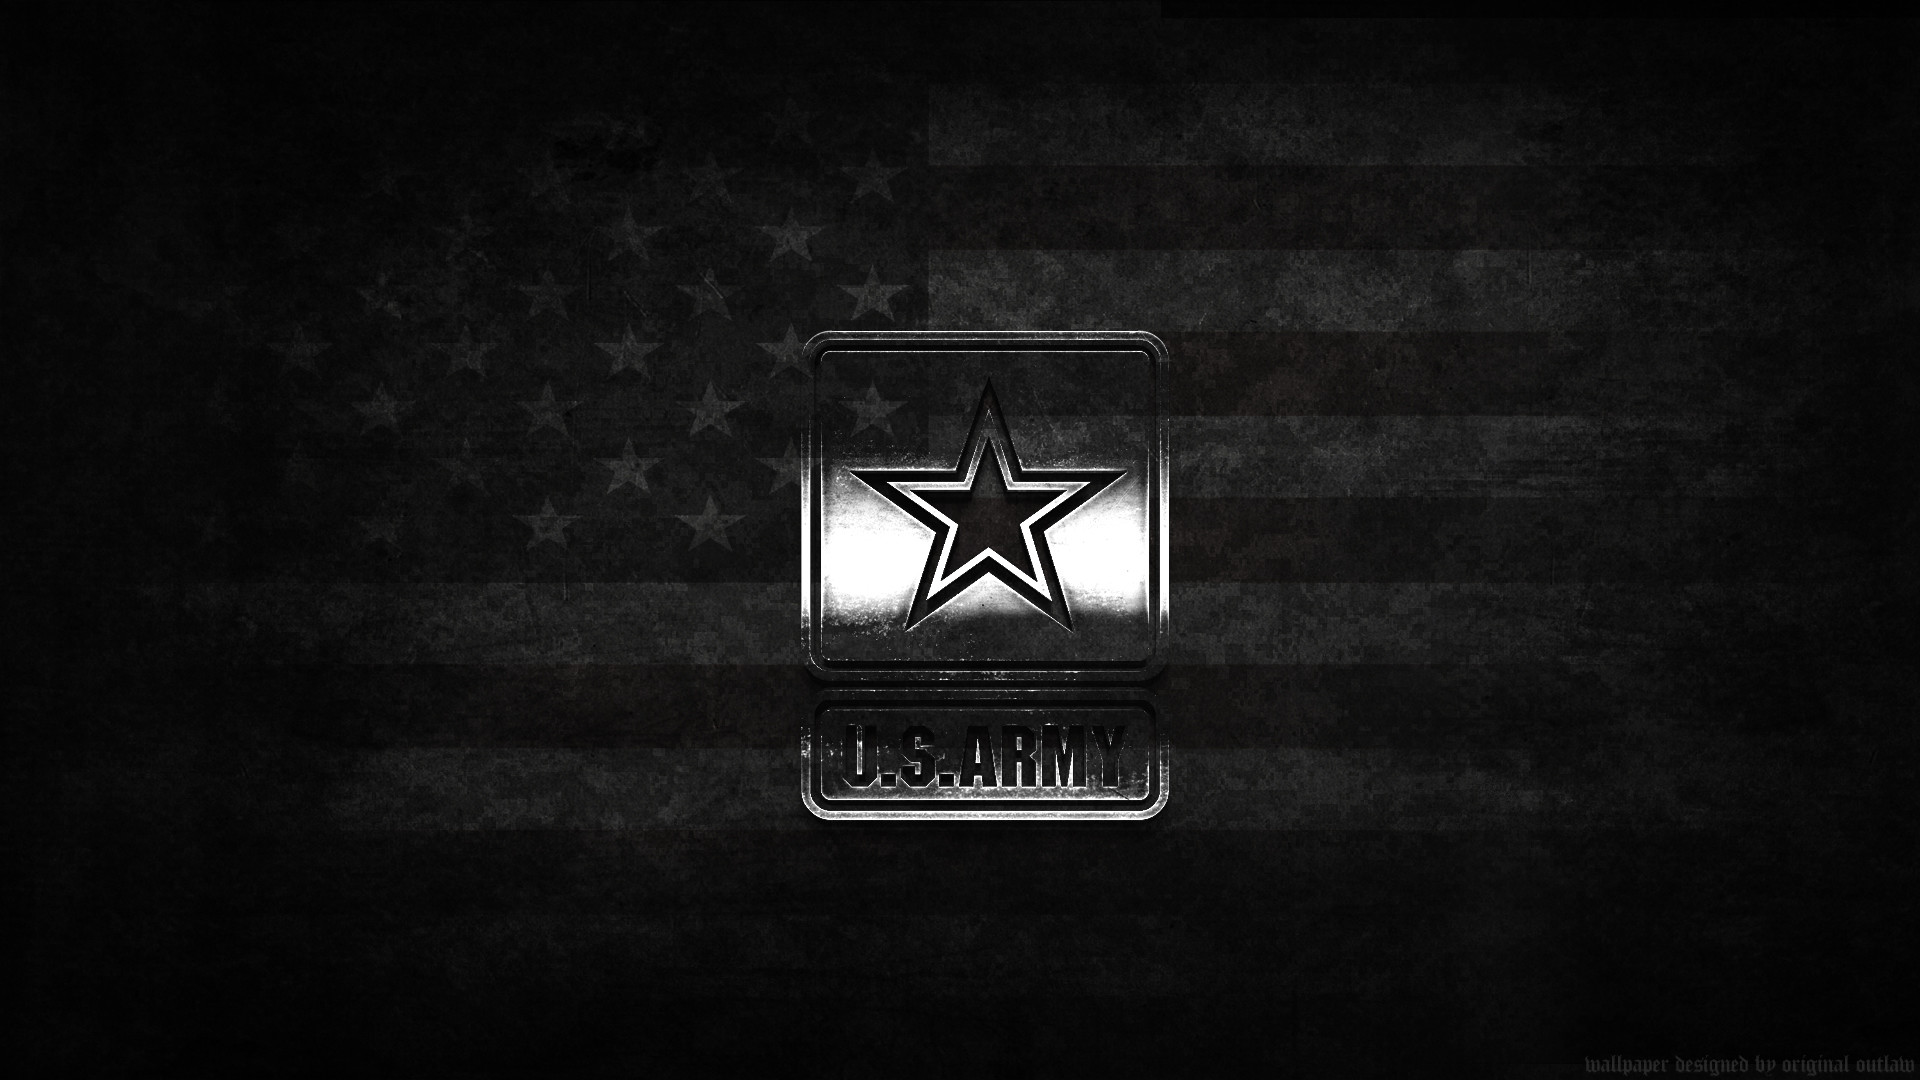 1920x1080 ... Free Police Wallpapers Background Â« Long Wallpapers Military Police ...